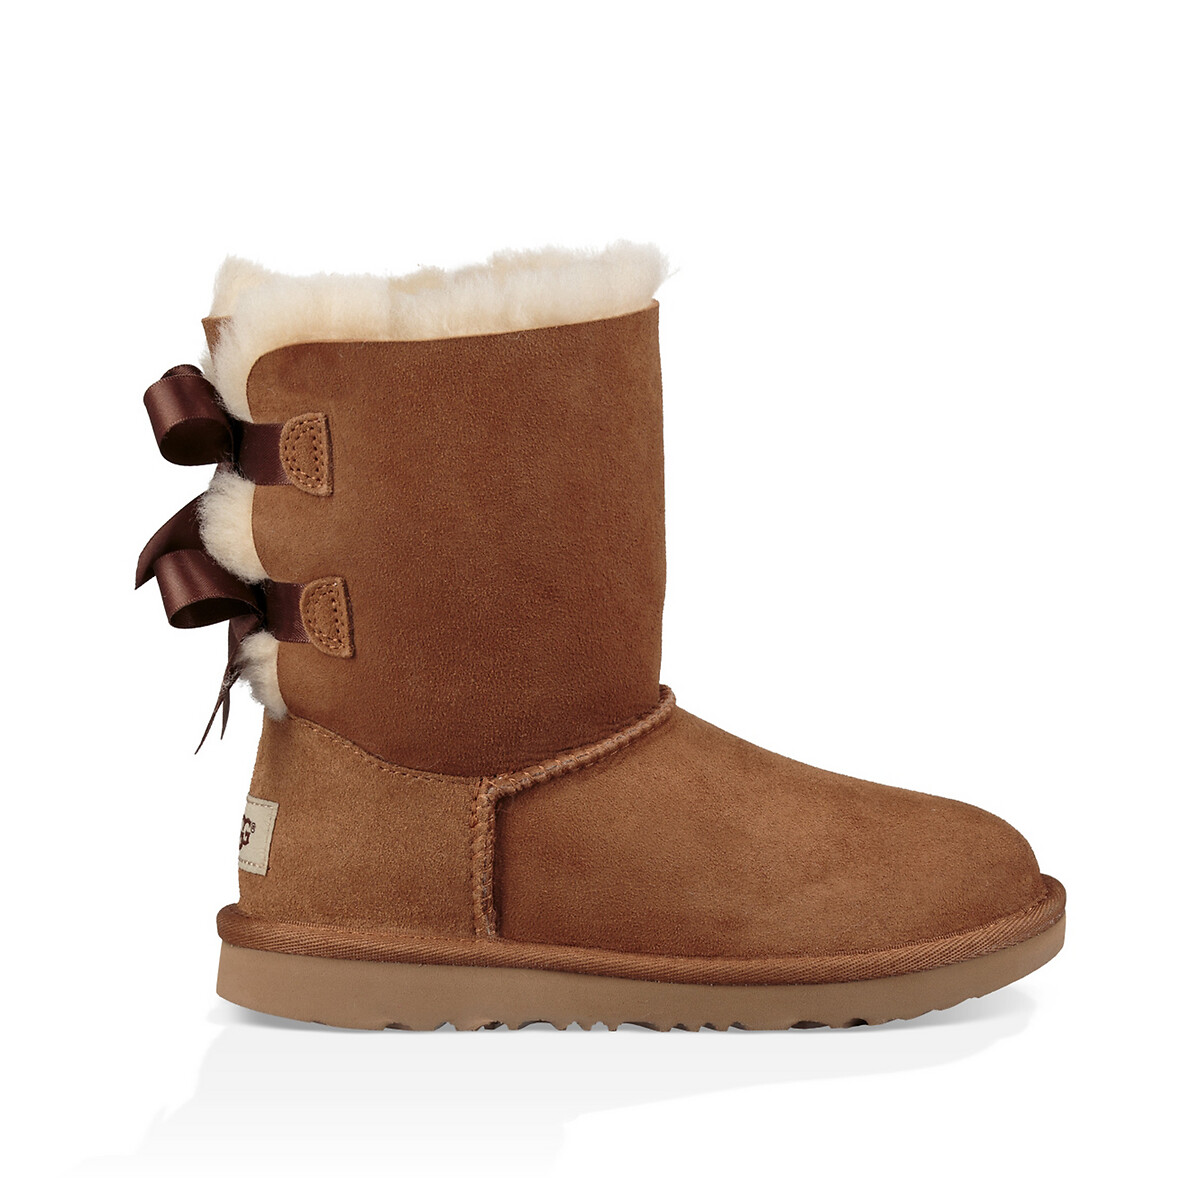 Image of Kids Bailey Bow II Ankle Boots in Suede